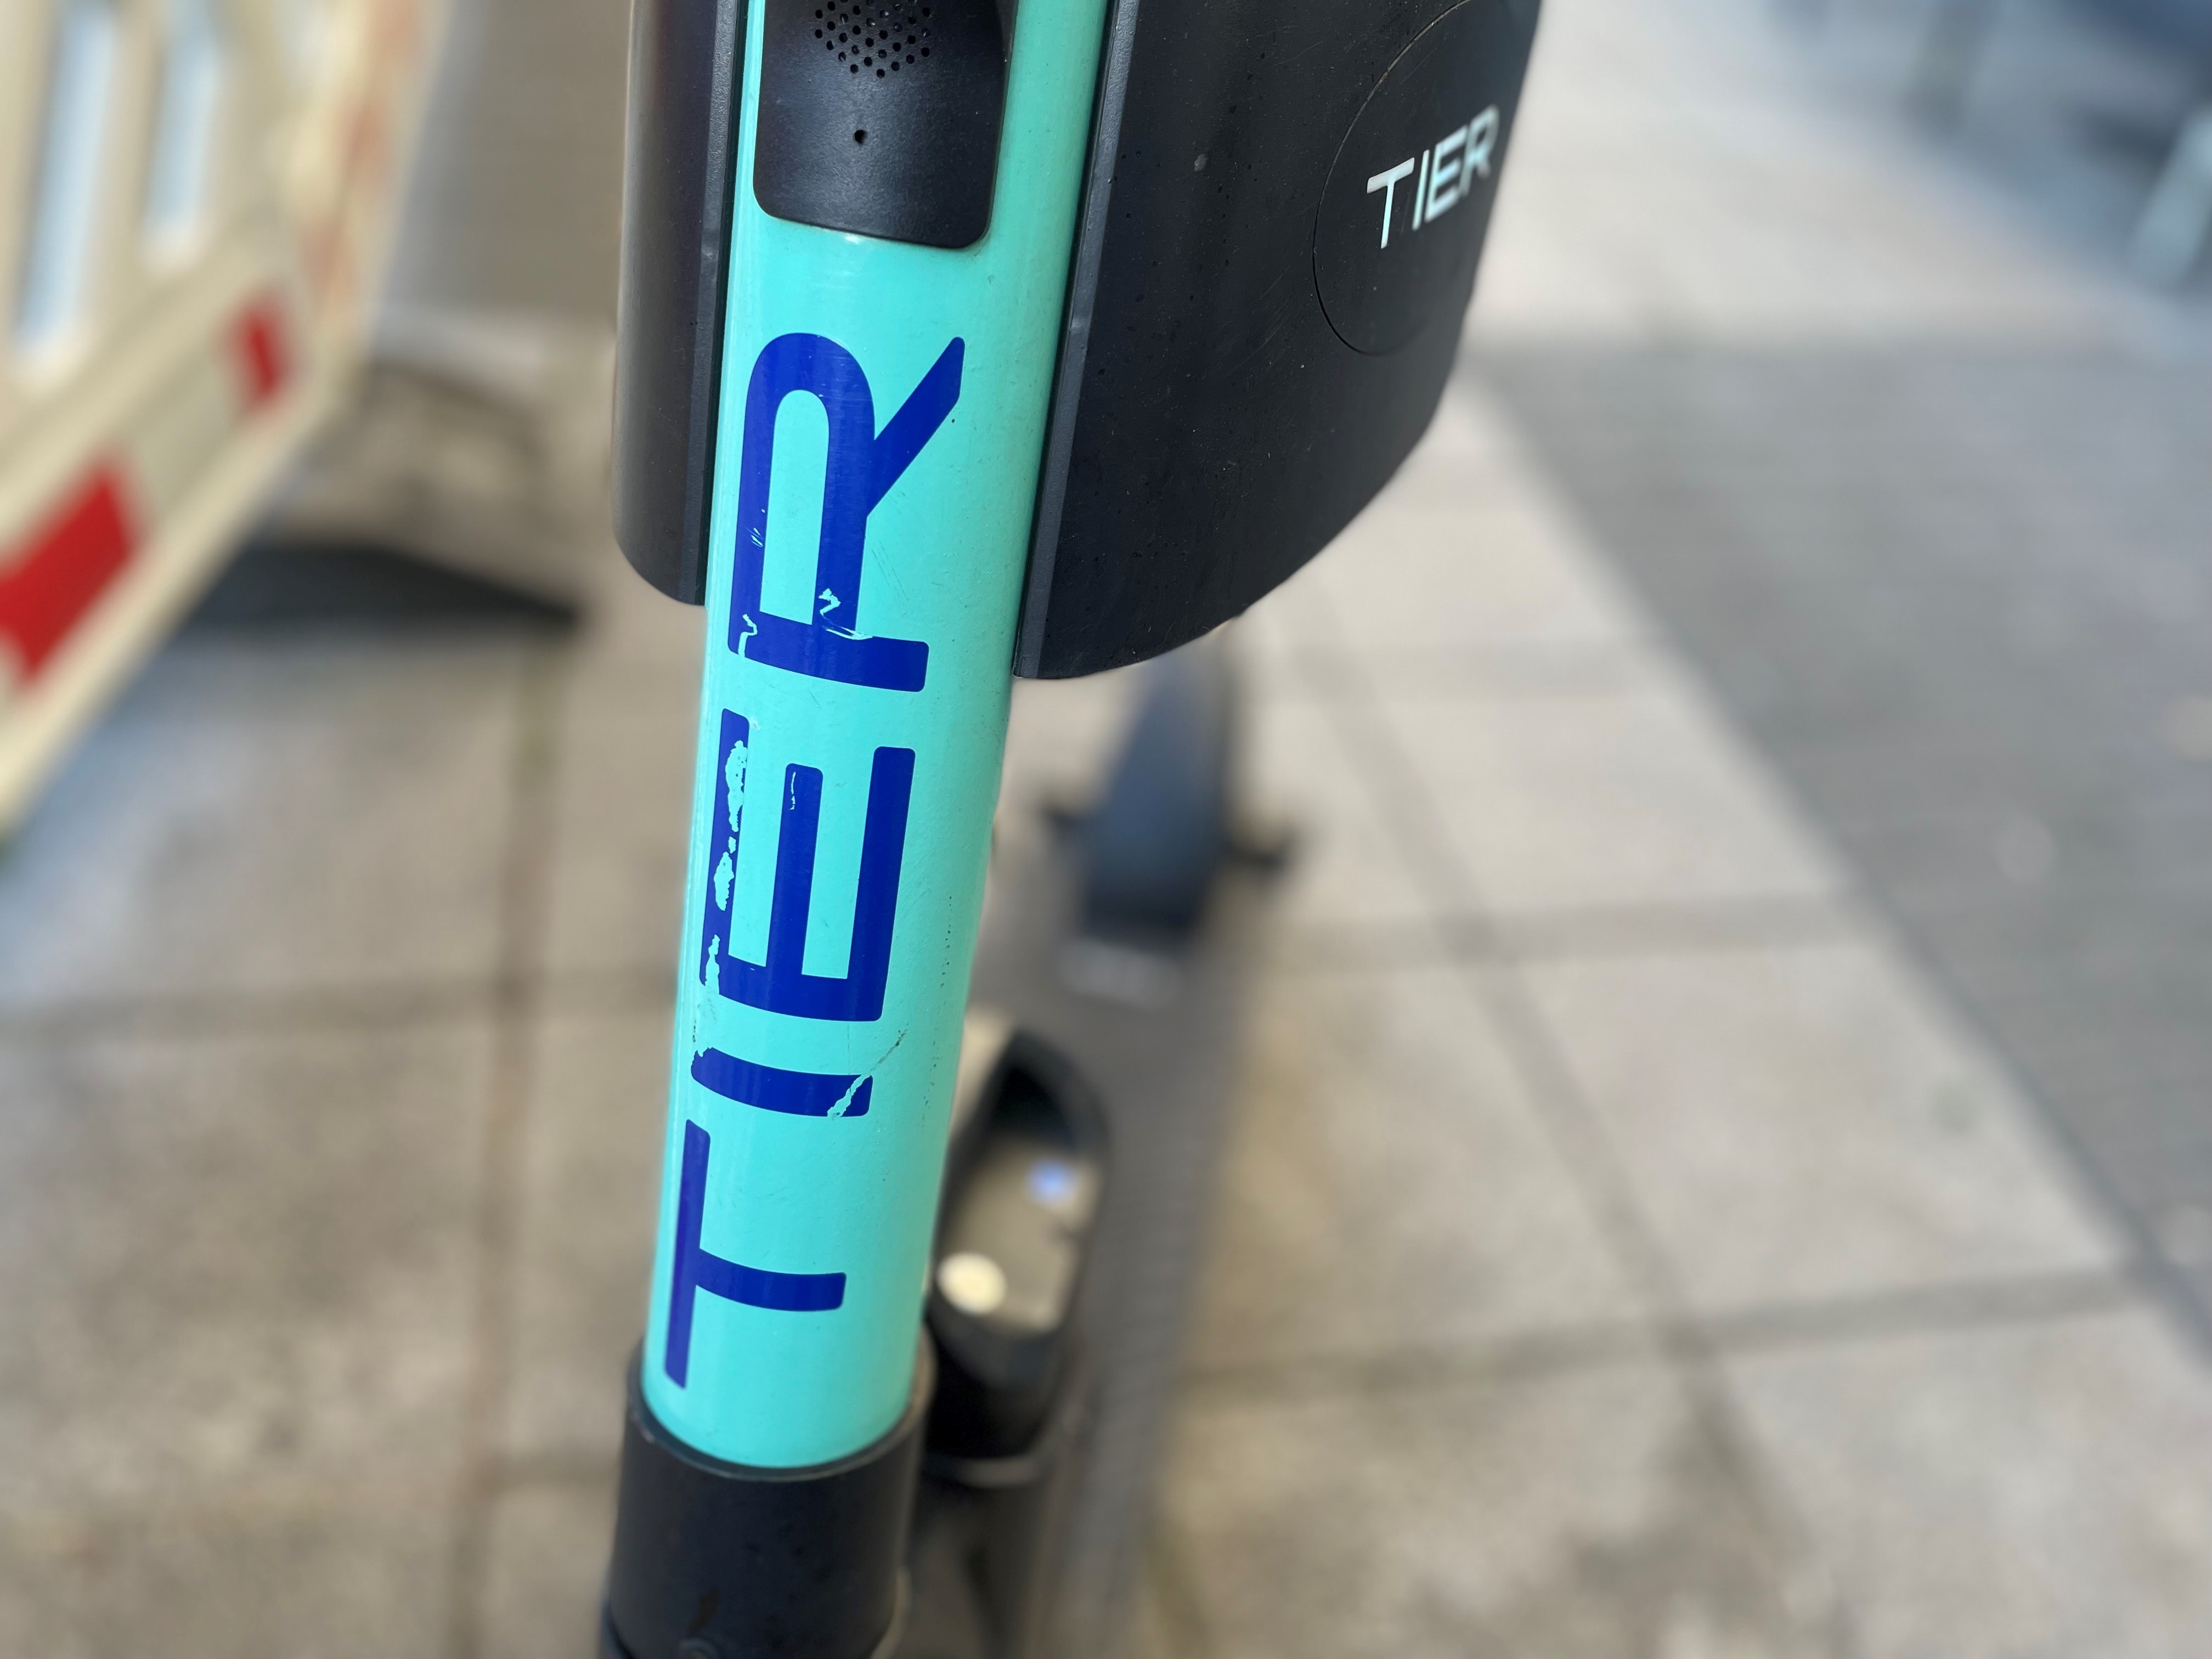 Tier scooter NextBike acquisition micromobility (© ITS International)